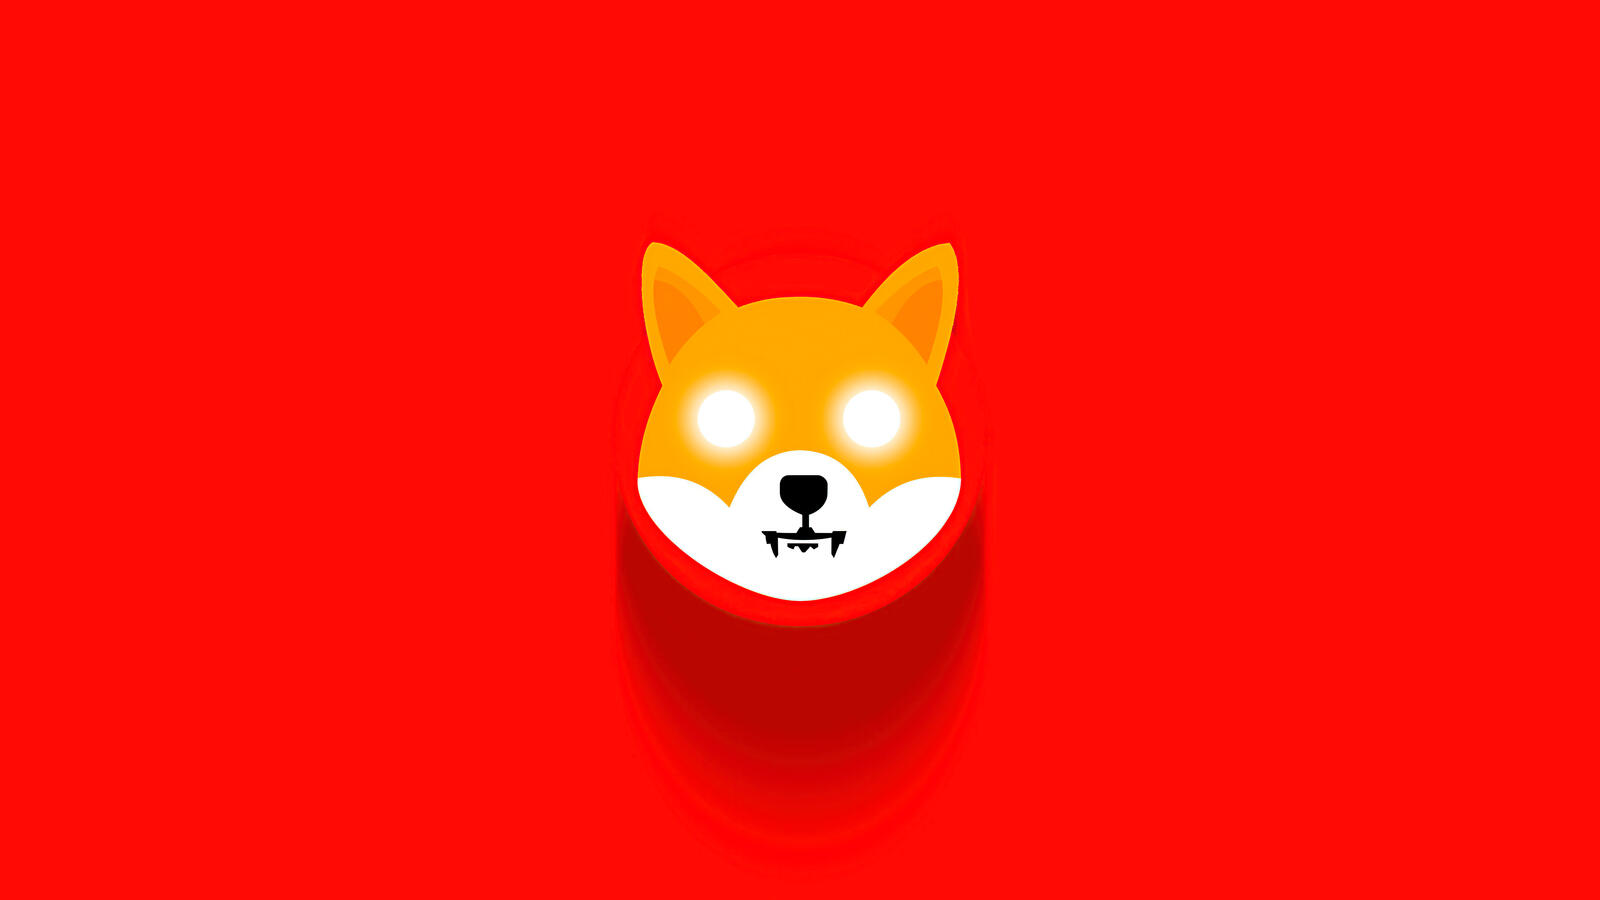 Free photo Rendering of a Shiba Inu Face on a Red Background